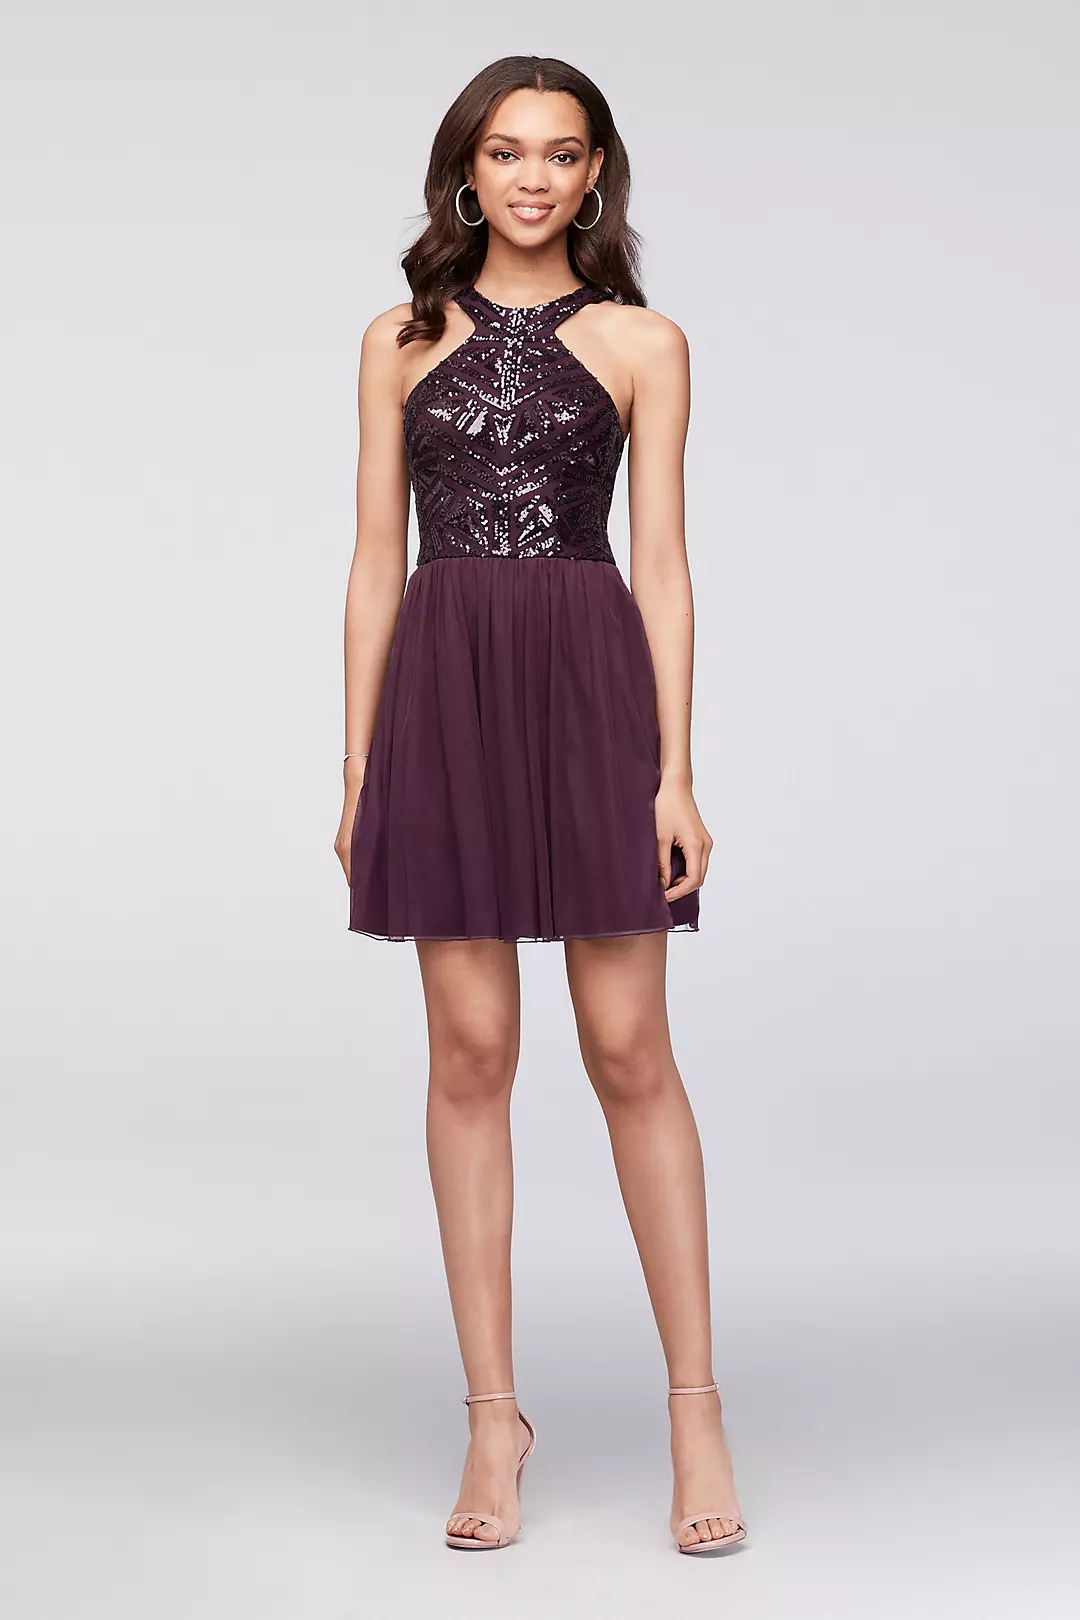 Geometric Sequin and Mesh Dress with Keyhole Back Image